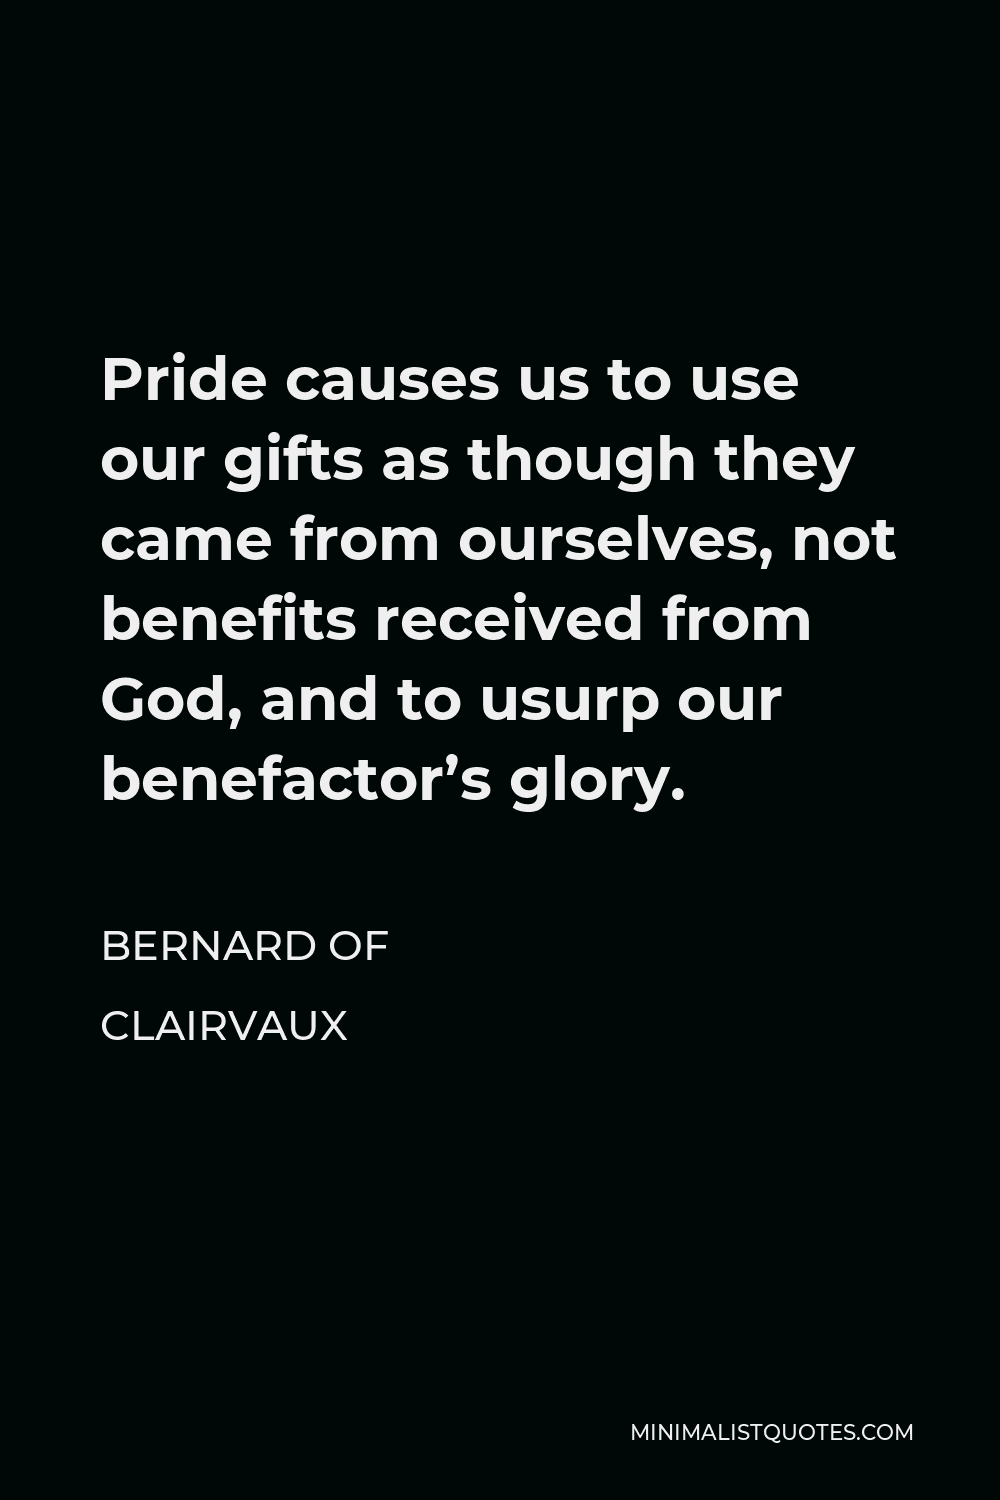 Bernard of Clairvaux Quote - Pride causes us to use our gifts as though they came from ourselves, not benefits received from God, and to usurp our benefactor’s glory.